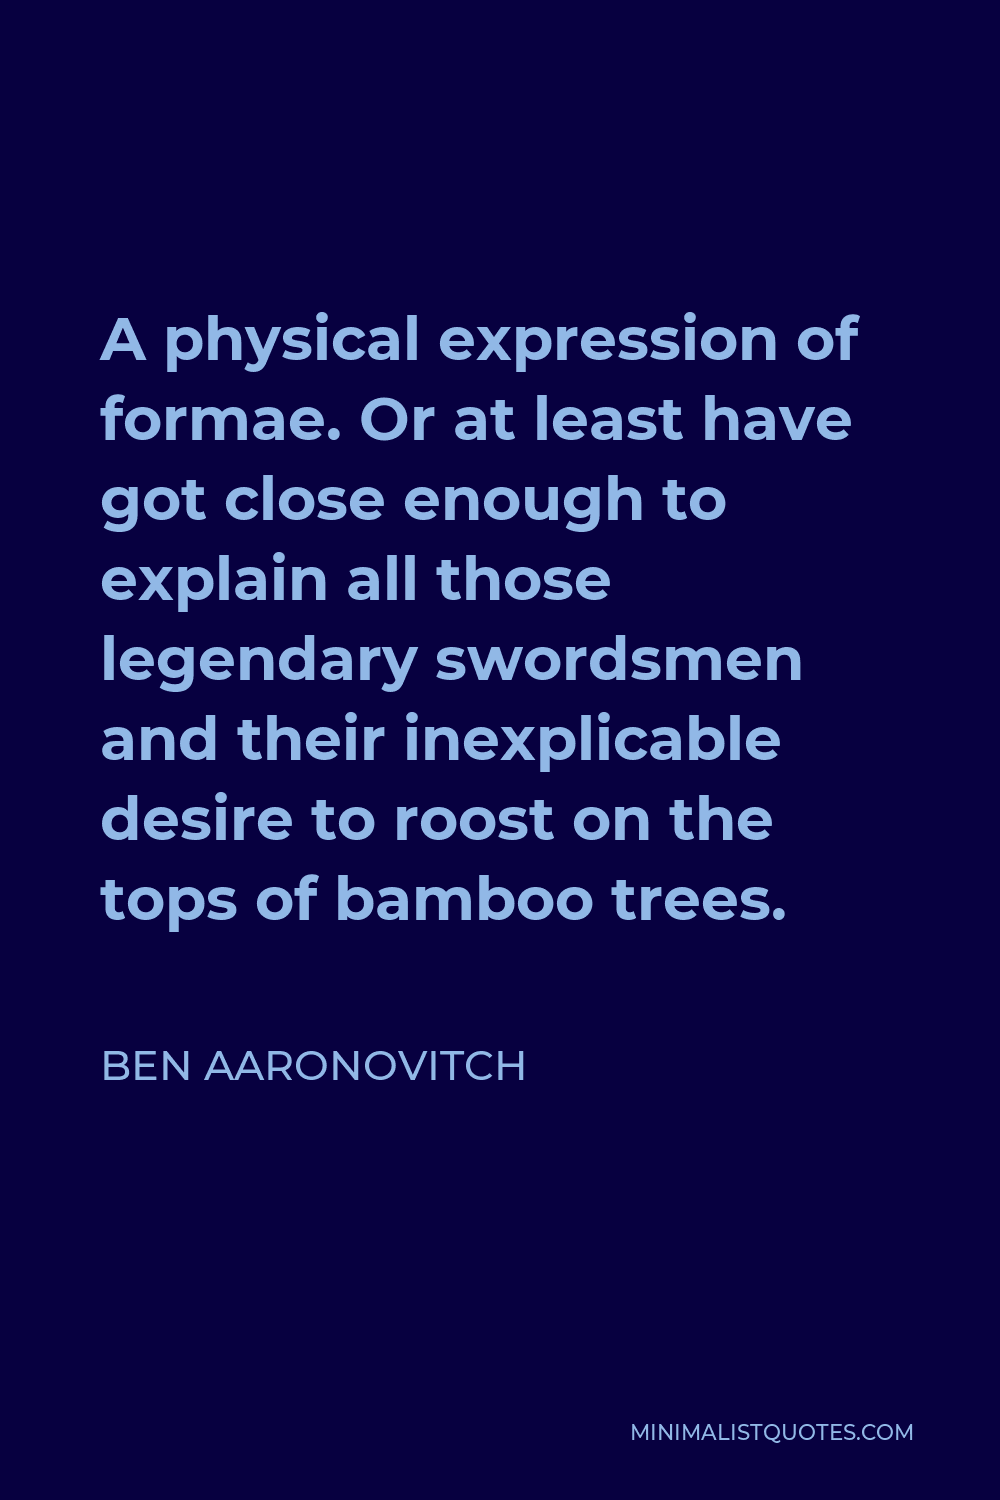 Ben Aaronovitch Quote - A physical expression of formae. Or at least have got close enough to explain all those legendary swordsmen and their inexplicable desire to roost on the tops of bamboo trees.